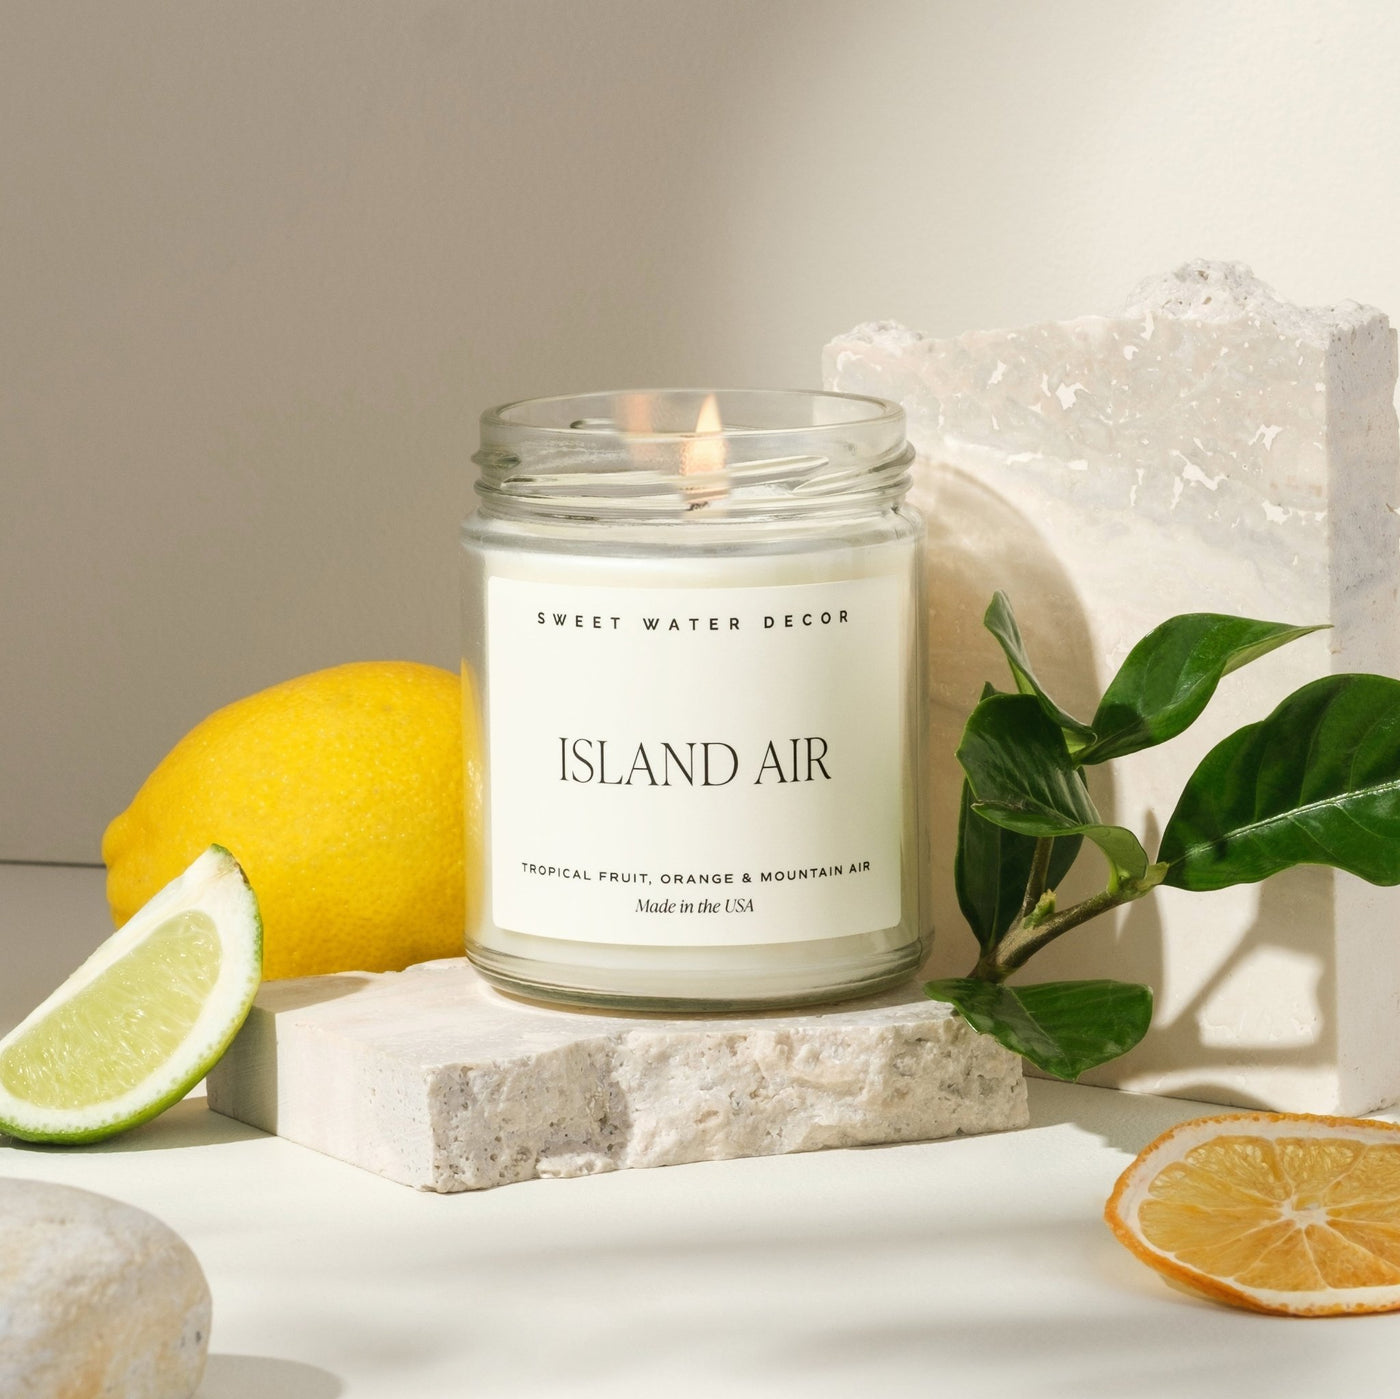 Island Air Soy Candle - Clear Jar - 9 oz - Sweet Water Decor - Candles